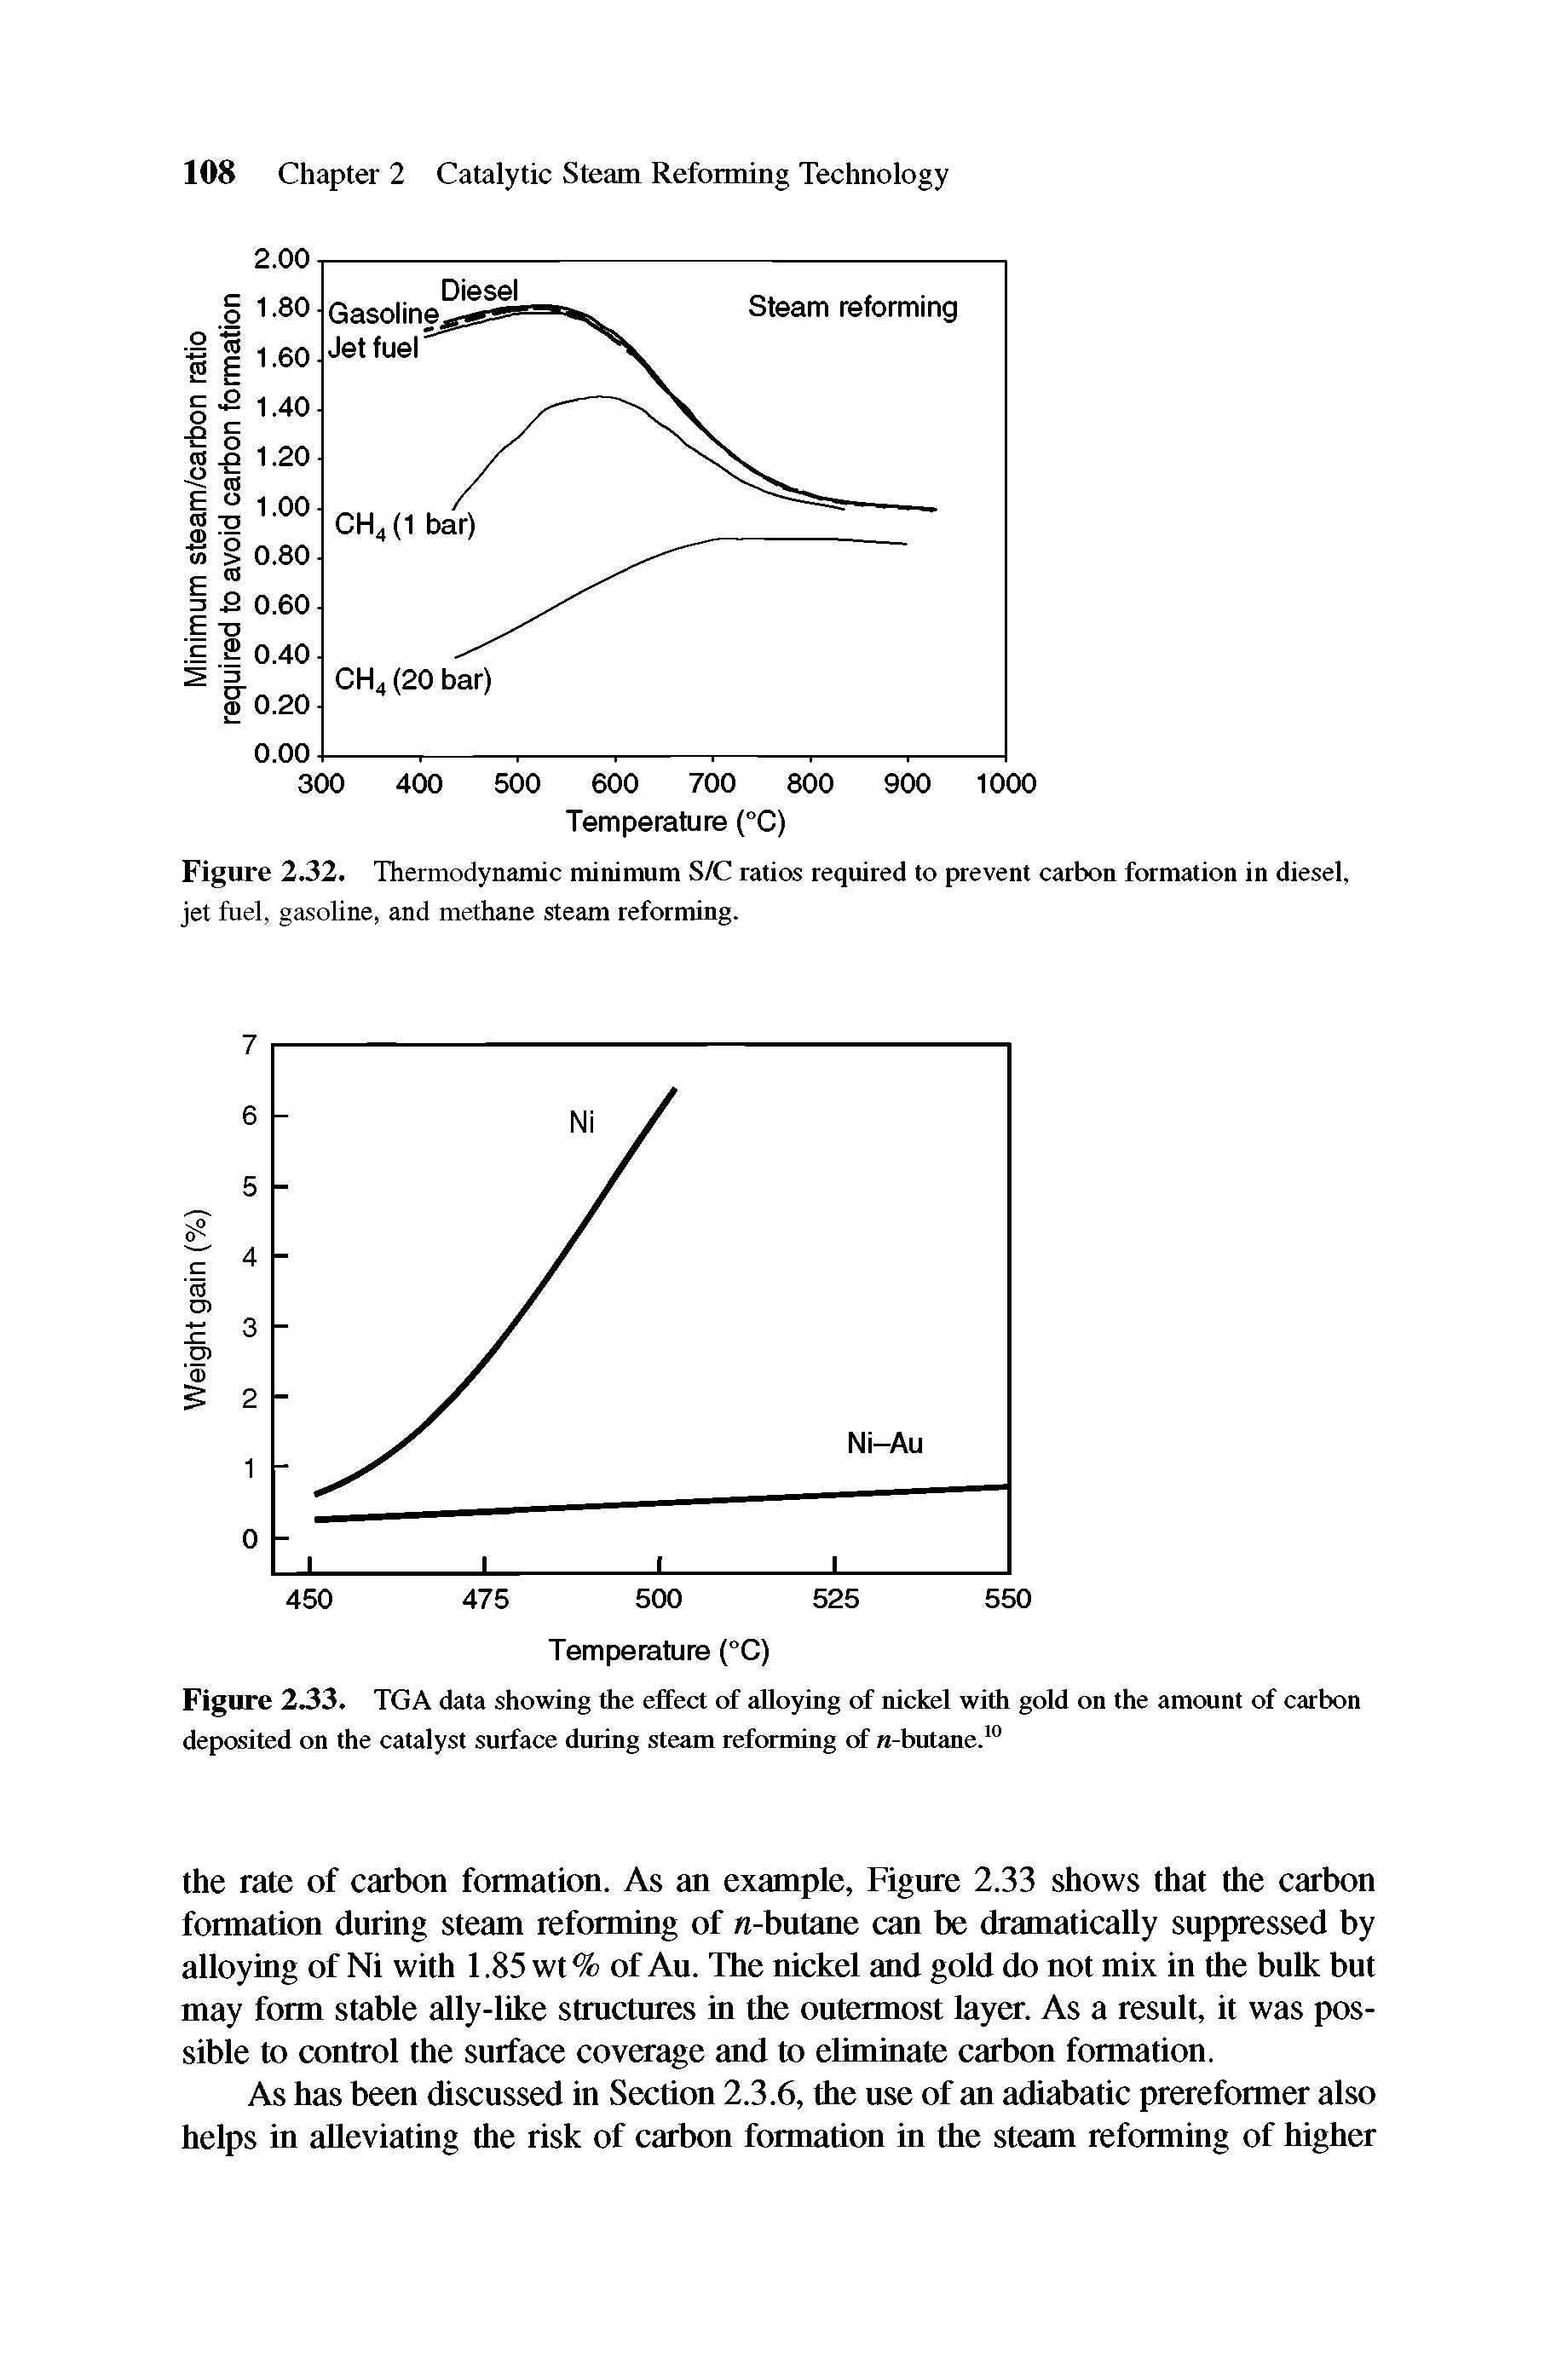 Figure 2.33. TGA data showing the effect of alloying of nickel with gold on the amount of carbon deposited on the catalyst surface during steam reforming of n-butane.10...